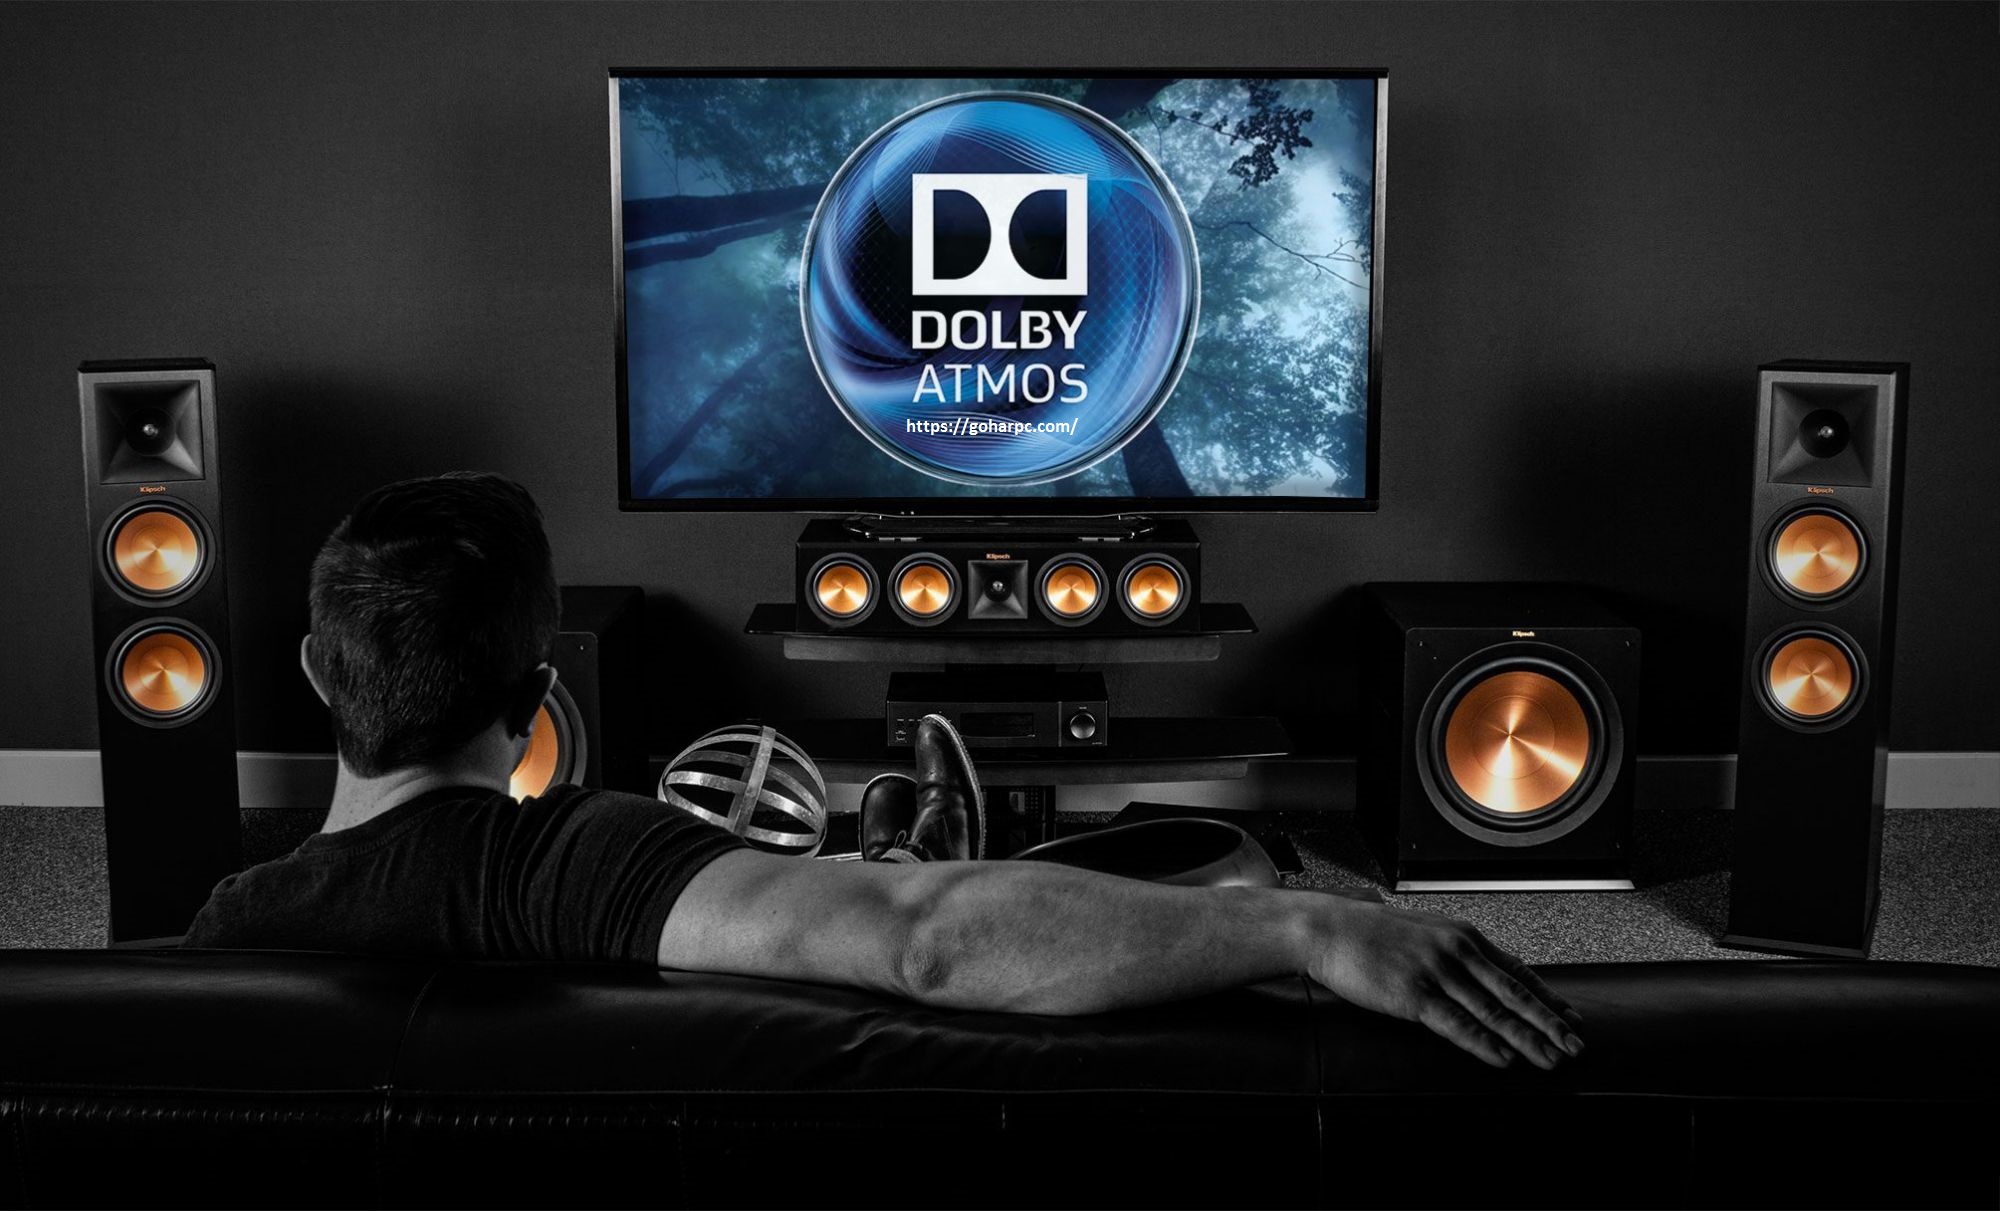 Dolby Atmos Windows 10,8.1,8,7 Cracked Free Download